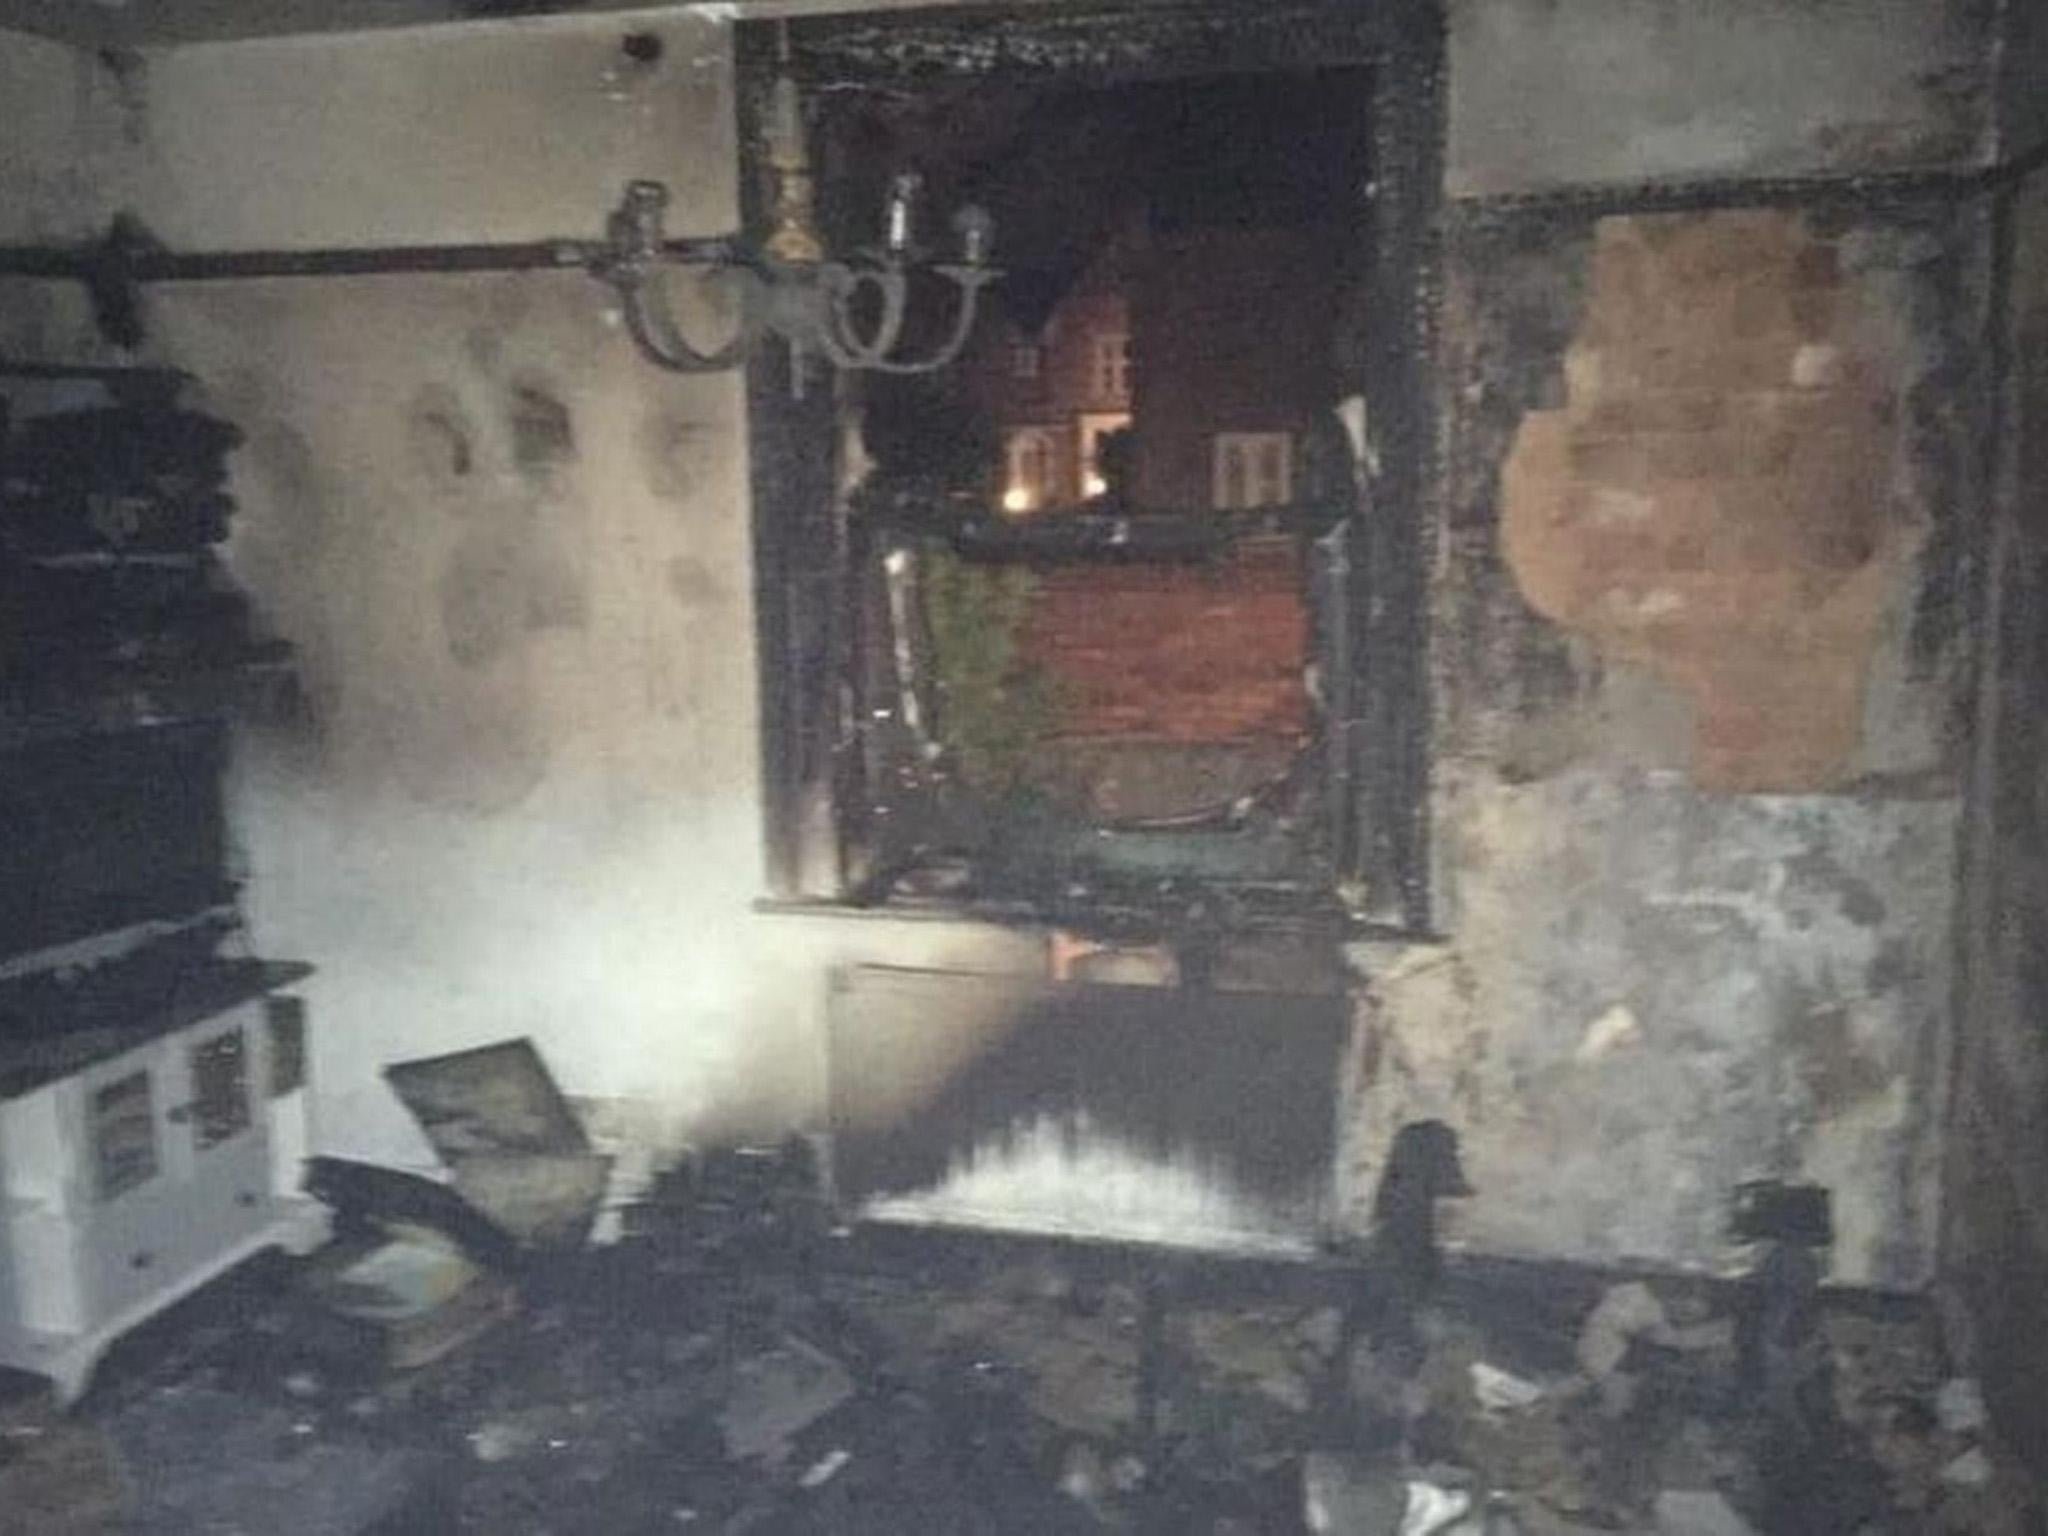 The front room of the holiday home was gutted by the fire